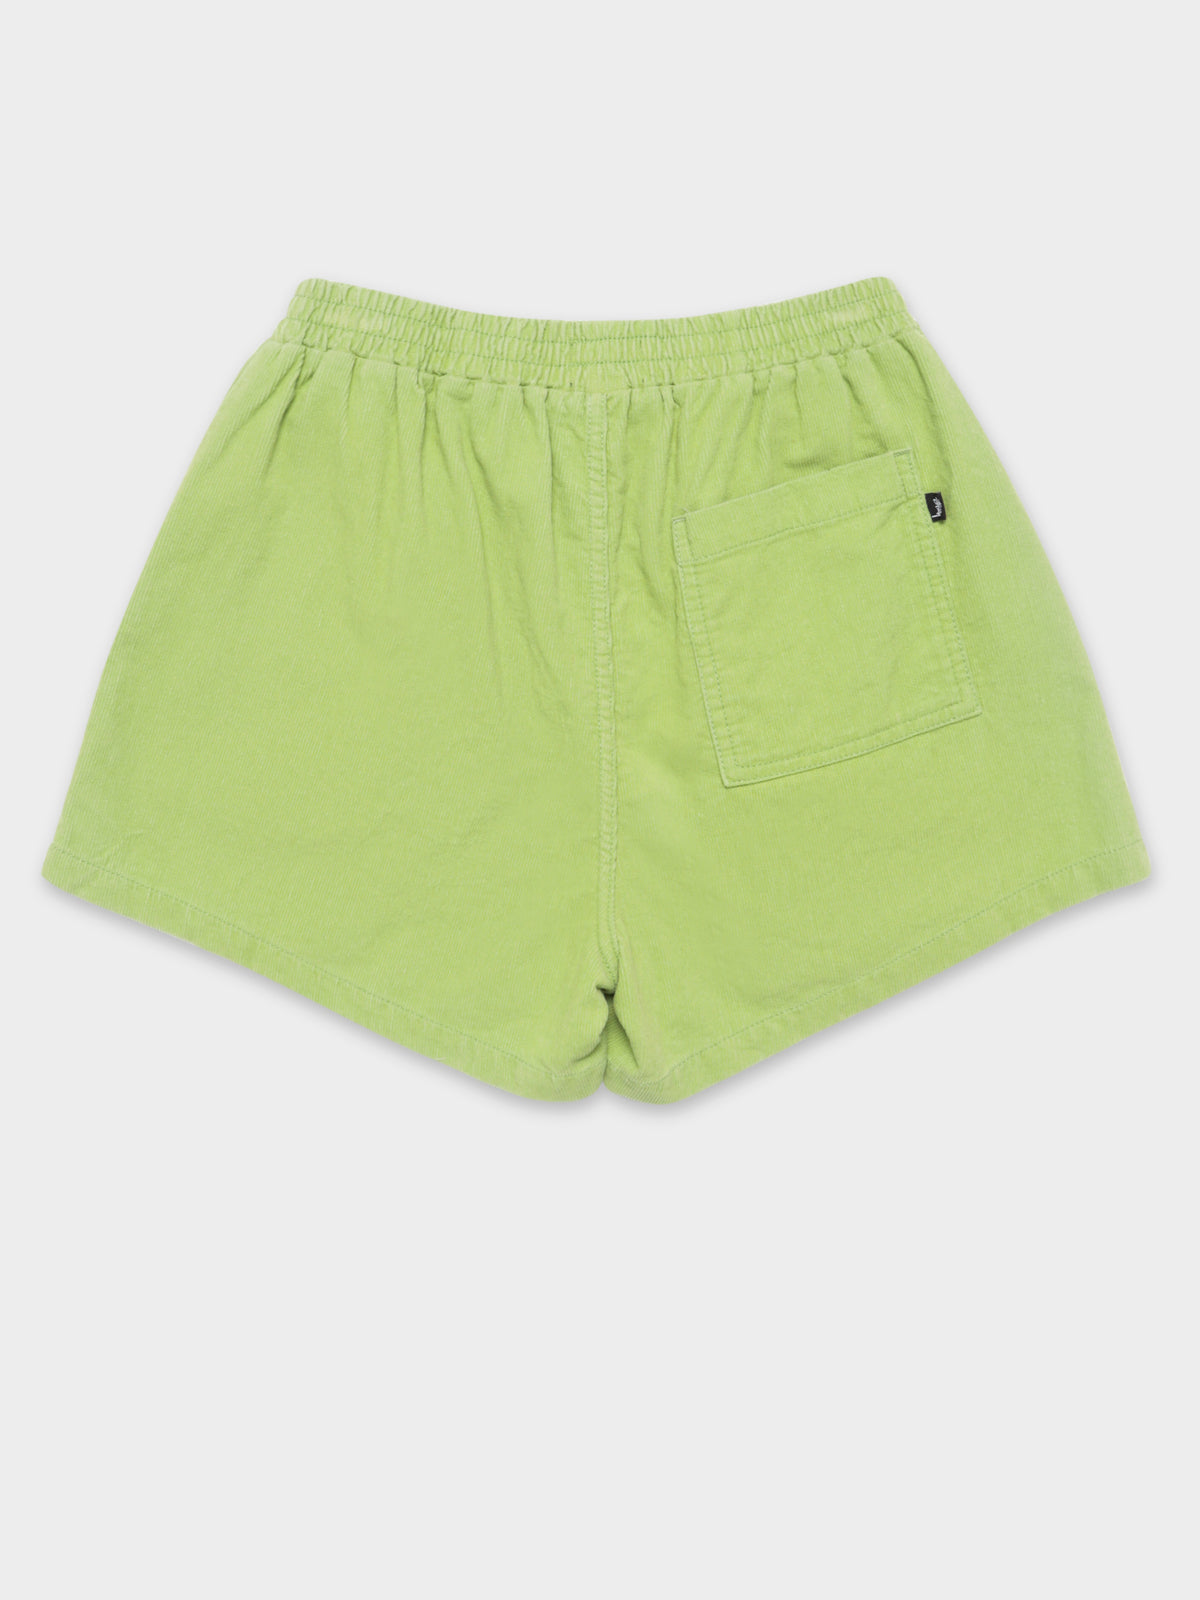 Stock Cord Shorts in Lime